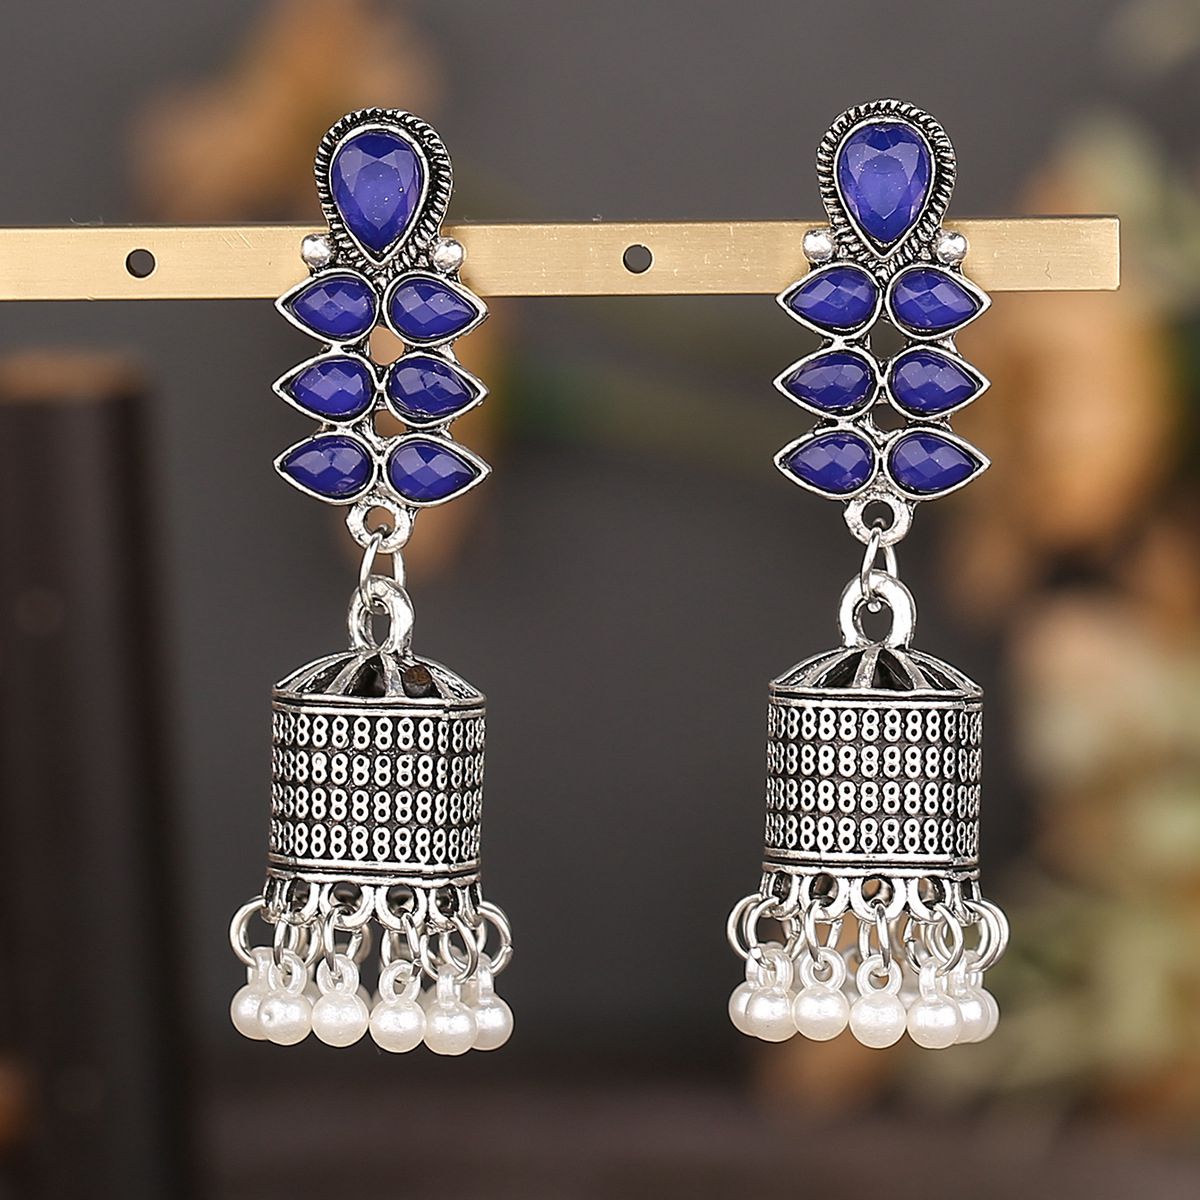 Ethnic-Silver-Color-Bell-Indian-Earrings-For-Women-Pendient-Vintage-Gyspy-CZ-Leaf-Ladies-Earring-Jew-1005003740209370-3